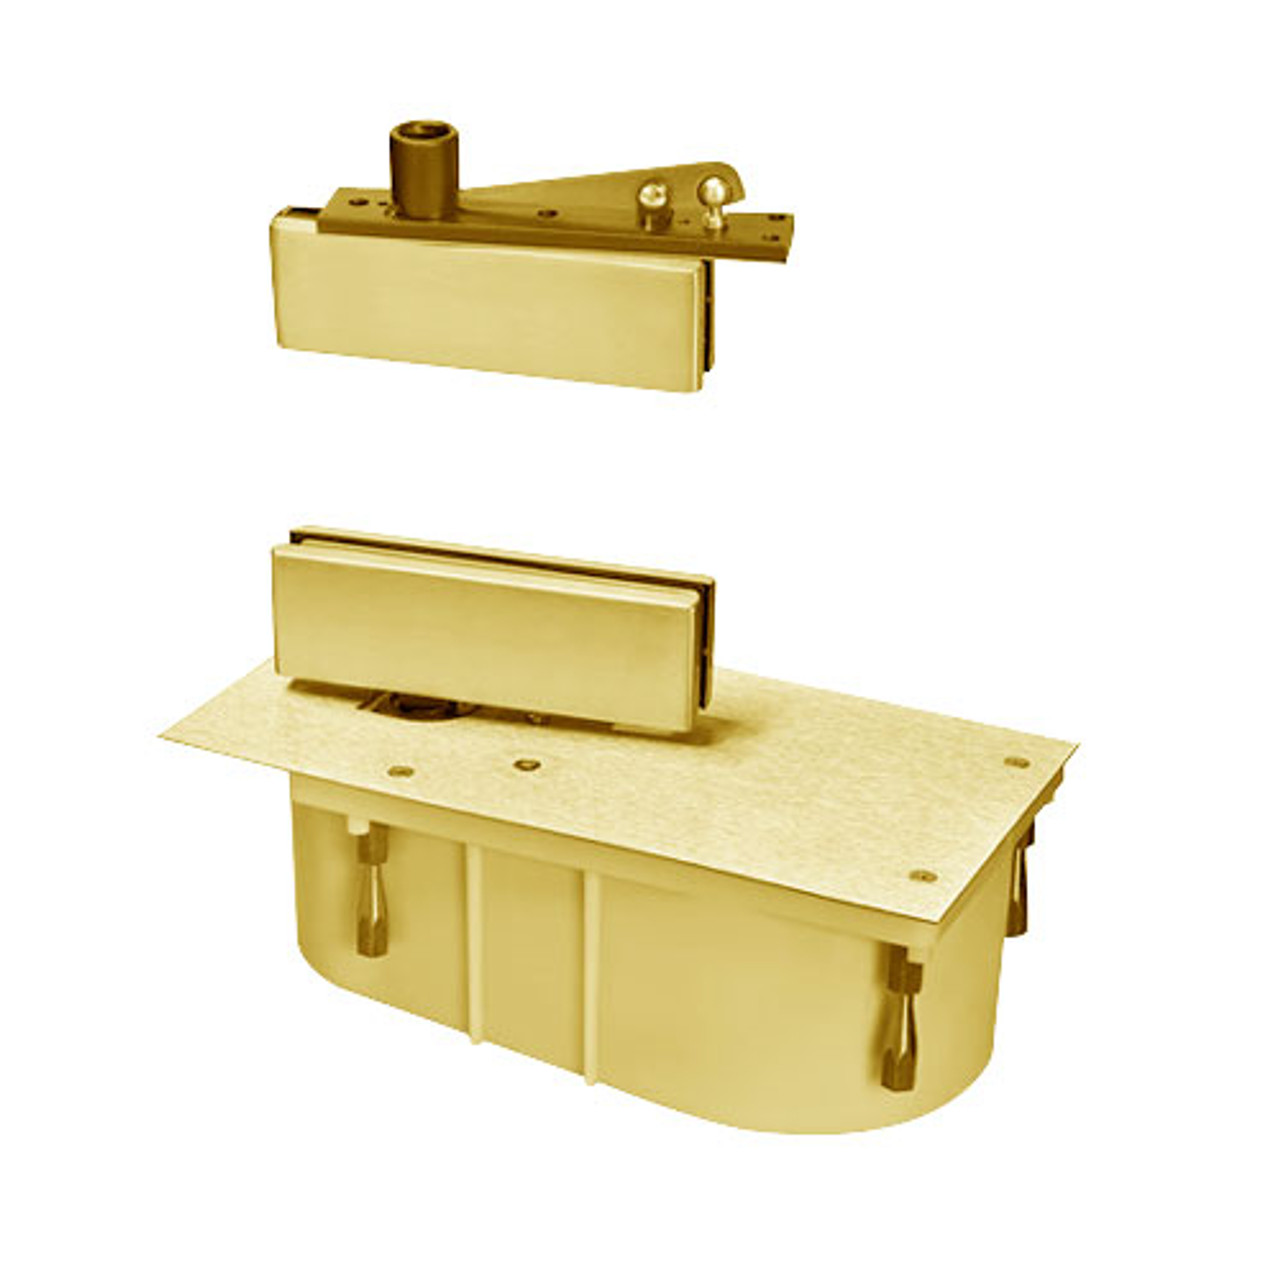 428-85S-LFP-CWF-RH-605 Rixson 428 Series Heavy Duty Single Acting Center Hung Floor Closer with Patch Fittings in Bright Brass Finish